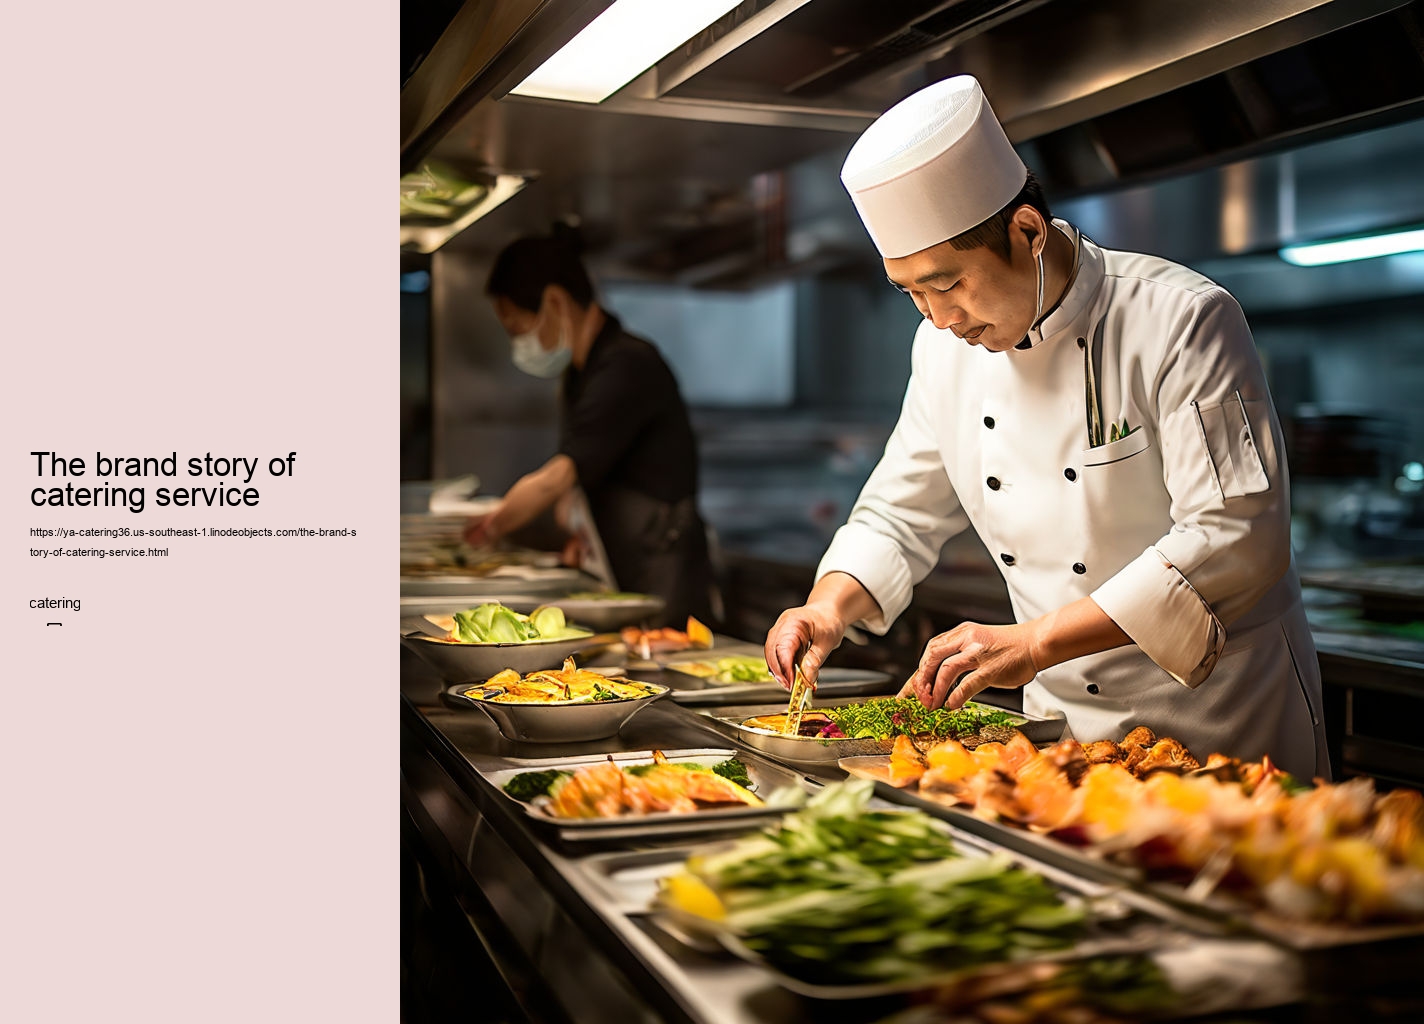 The brand story of catering service